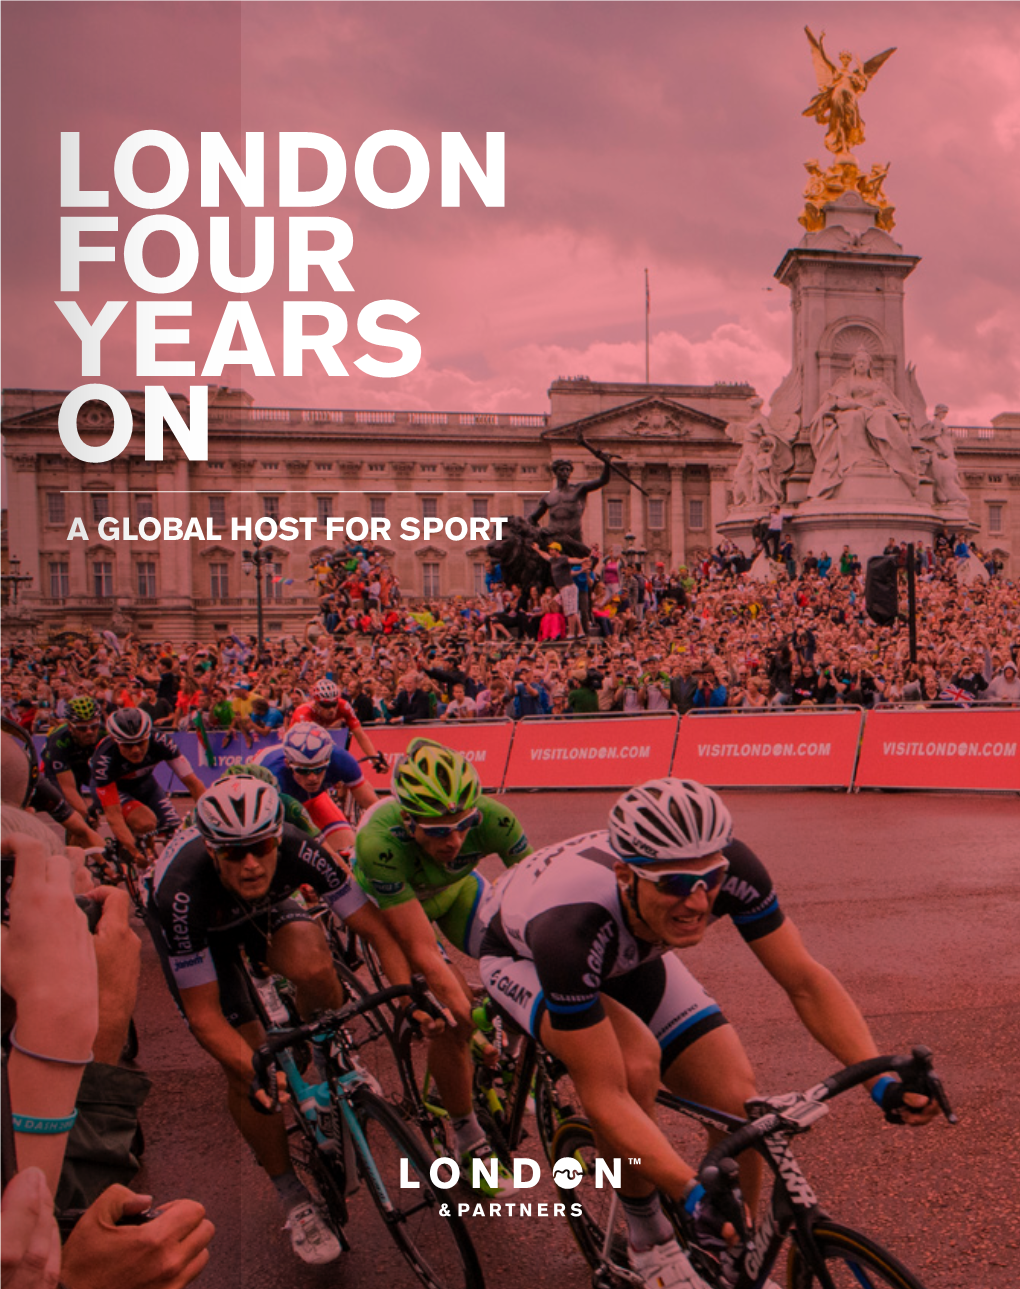 LONDON FOUR YEARS on a GLOBAL HOST for SPORT a ‘Home from an Active a Diverse Cultural Offering Home’ Crowd for All Sponsorship Participating Nations Marketplace